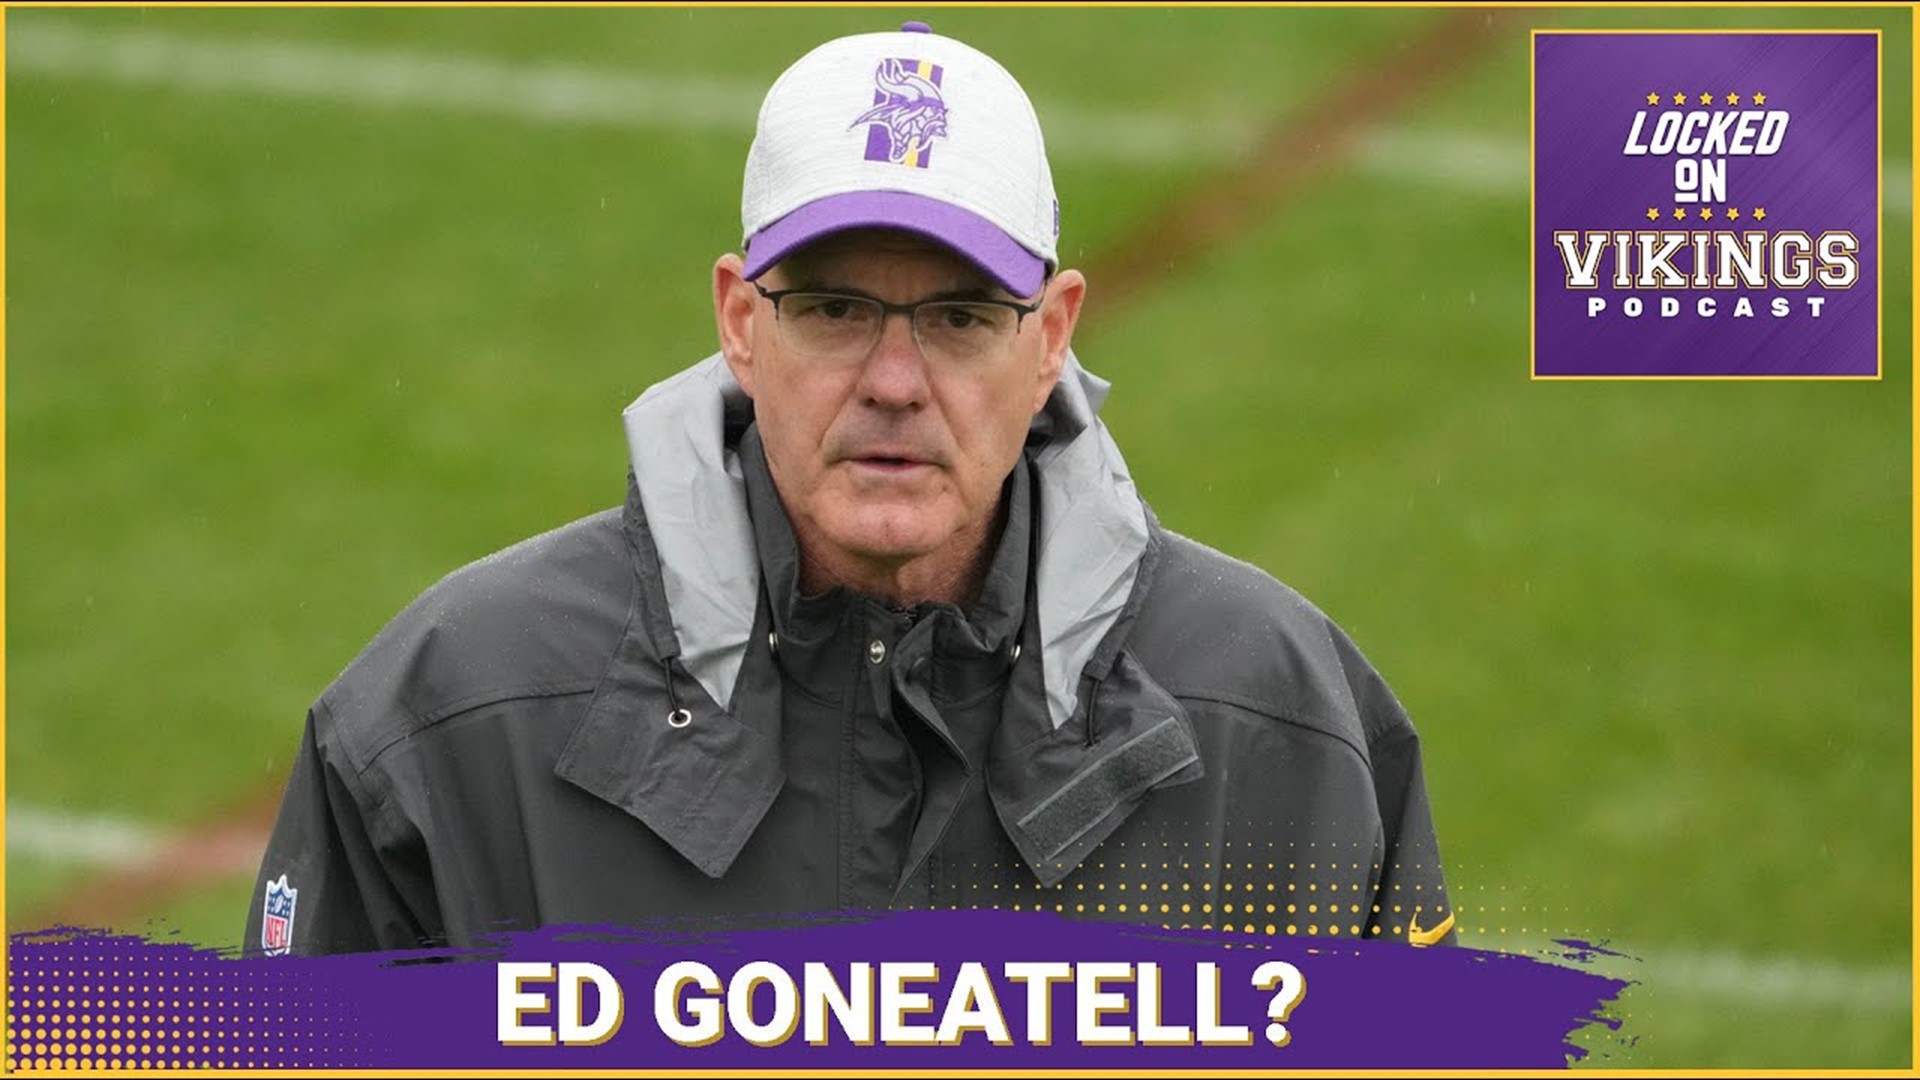 Minnesota Vikings Defensive Coordinator Ed Donatell has been the subject of quite a few interesting talkers this season.